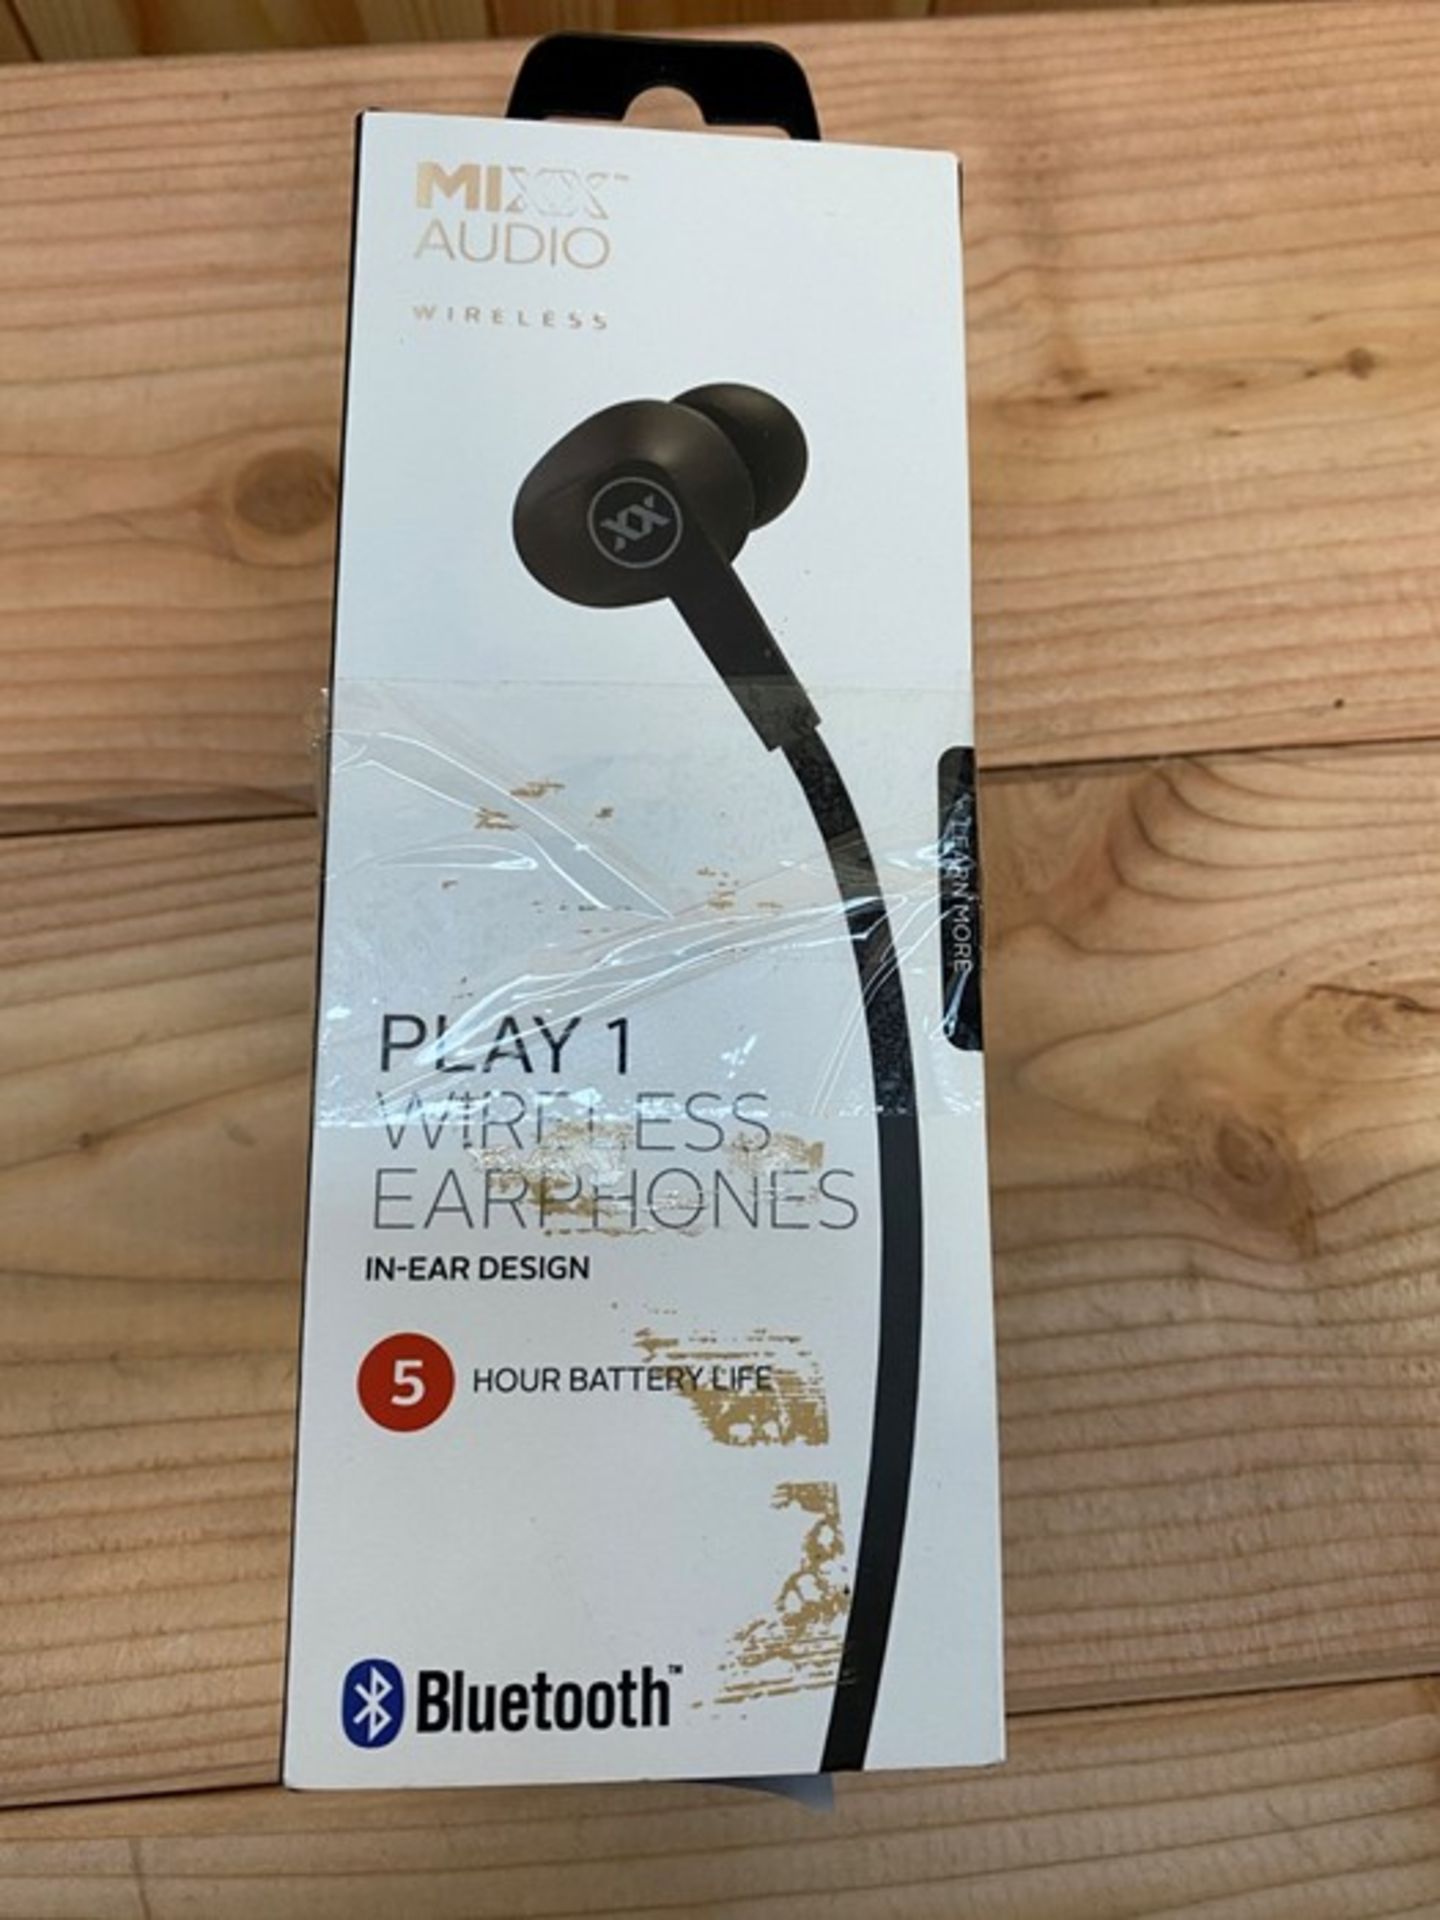 1 LOT TO CONTAIN 2 BOXED MIXX AUDIO PLAY 1 WIRELESS EARPHONES / RRP £40.00 / BL - 7665 (PUBLIC